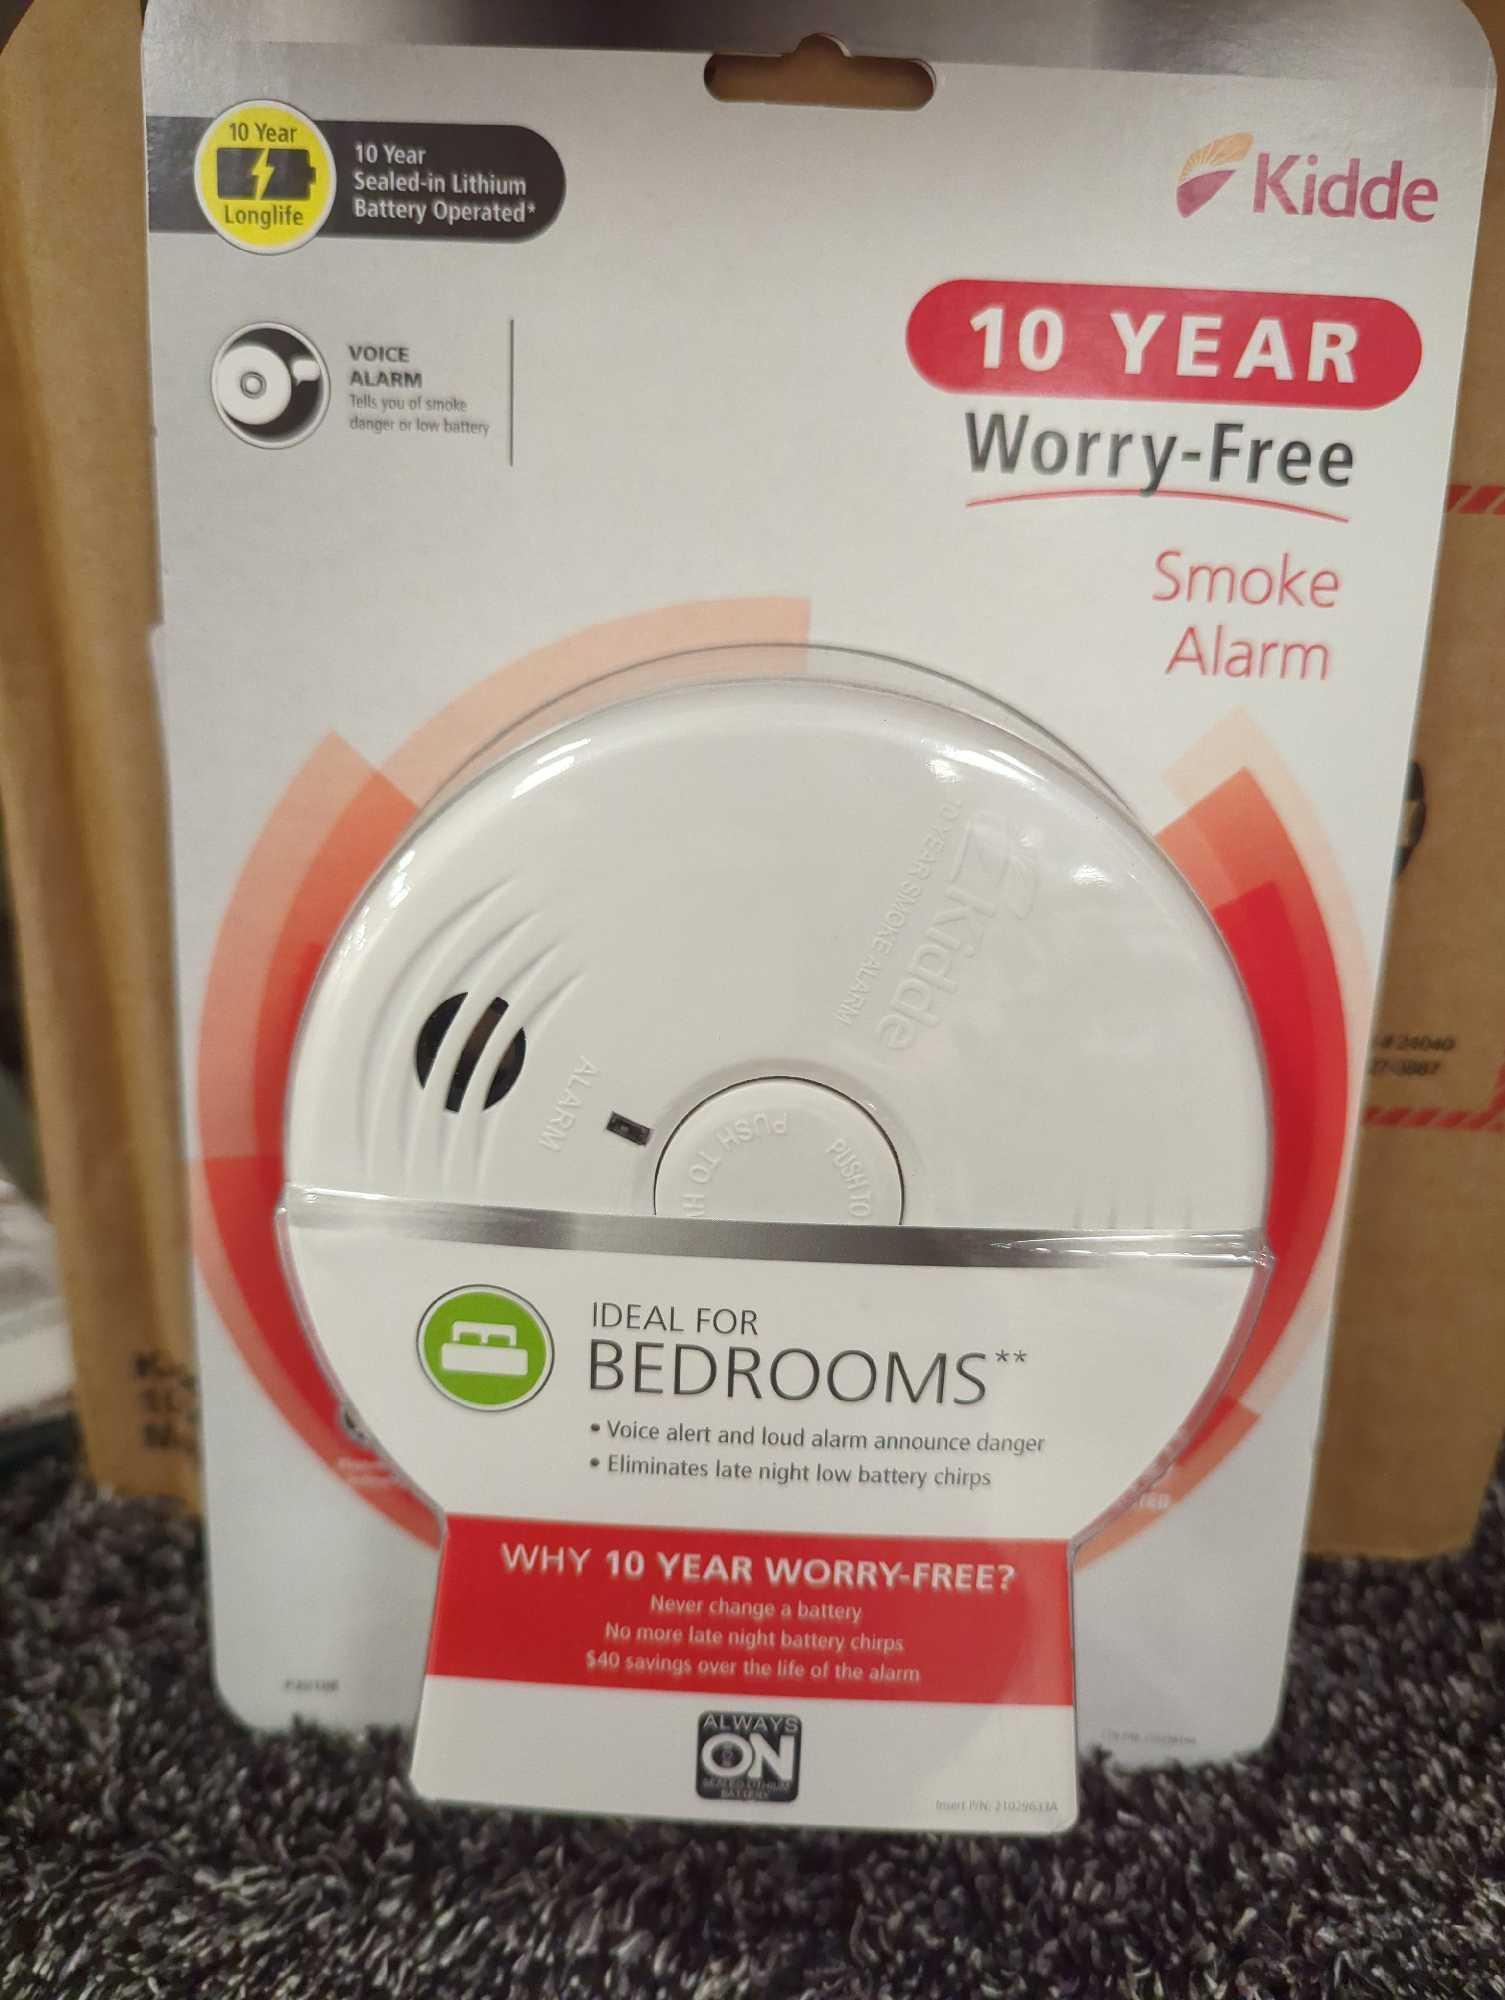 Box Lot of 3 Kidde 10 Year Worry-Free Sealed Battery Smoke Detector with Photoelectric Sensor and